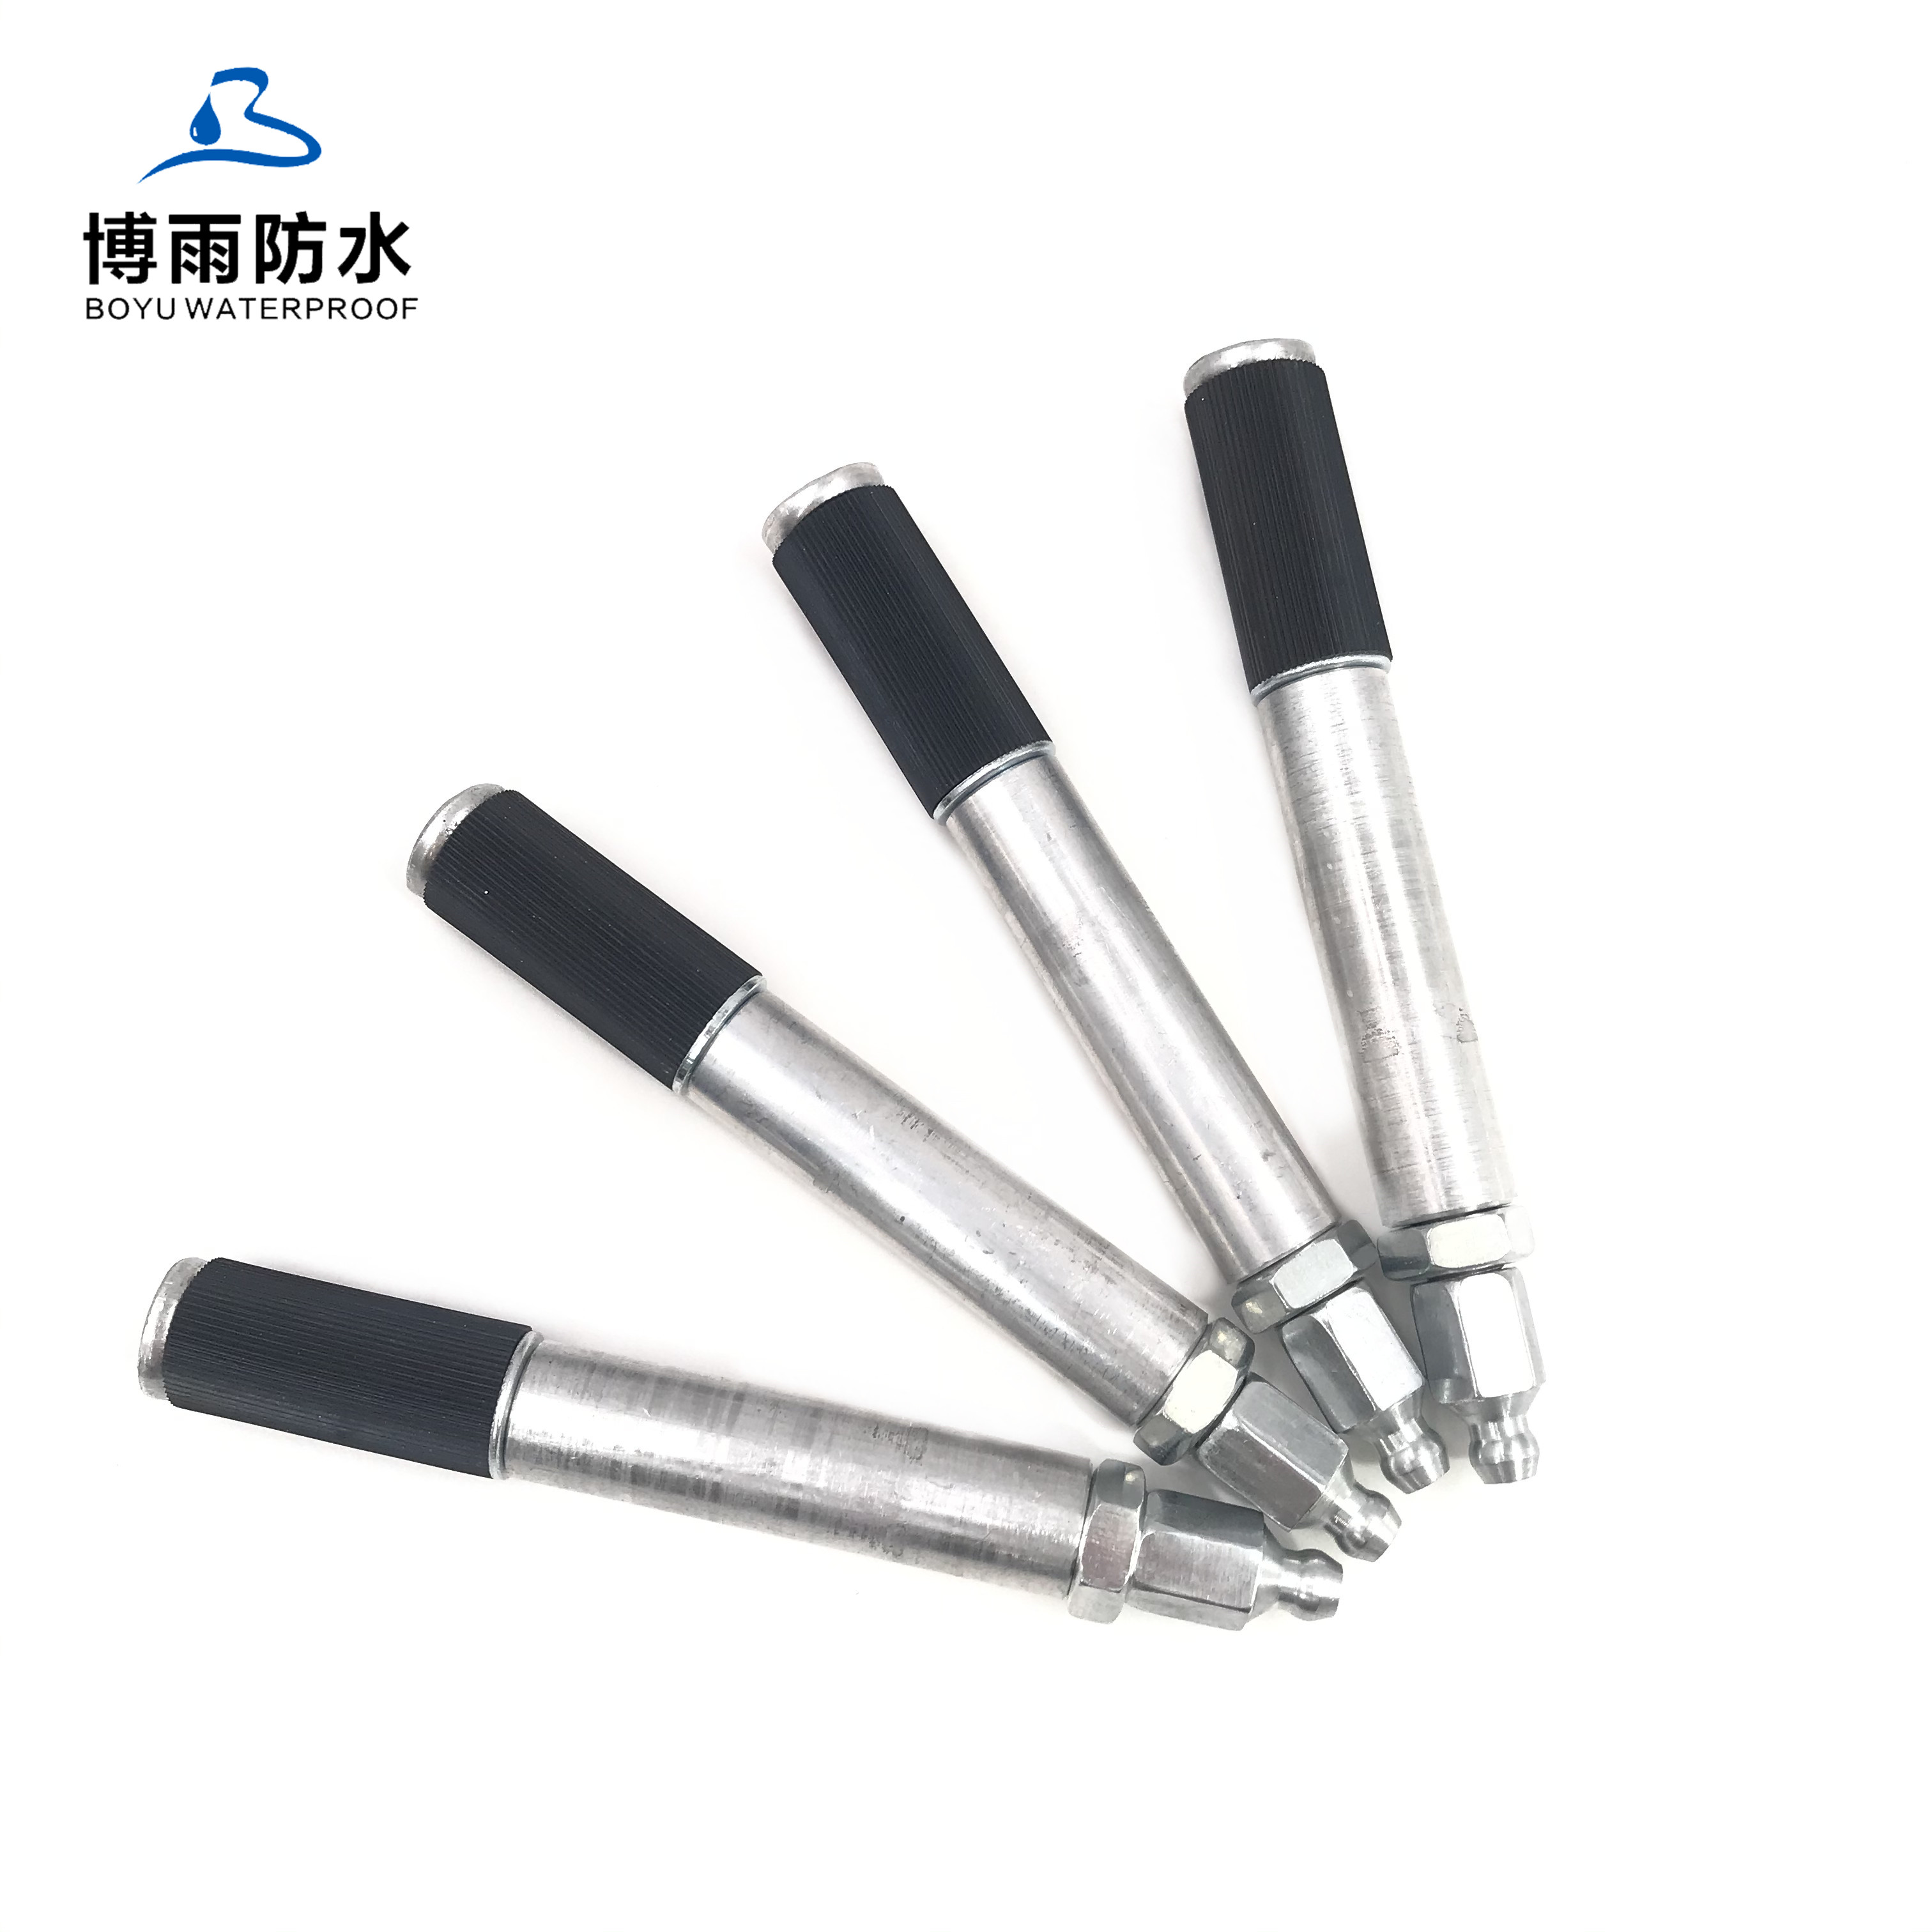 injection grouting packers steel Aluminum 13*100mm A10 Grout Injection Packer Featured Image